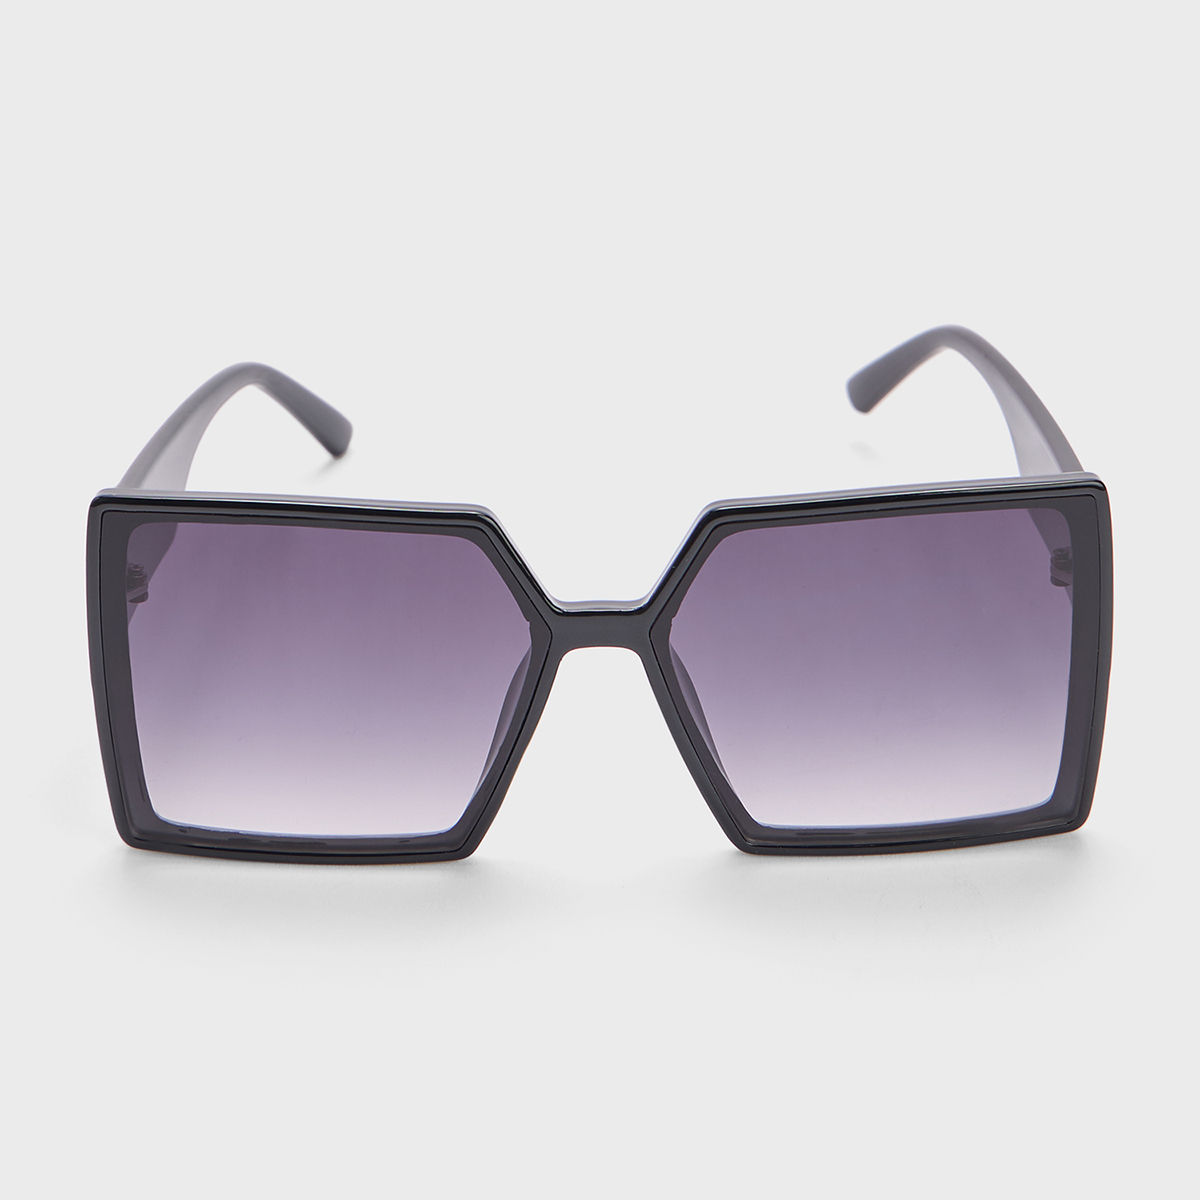 Classic Square Rectangle Sunglasses For Men And Women LW40064U Stereo Frame  For Outdoor Driving And Fashion Trend Brand Glasses From Fashion_glass7,  $44.96 | DHgate.Com